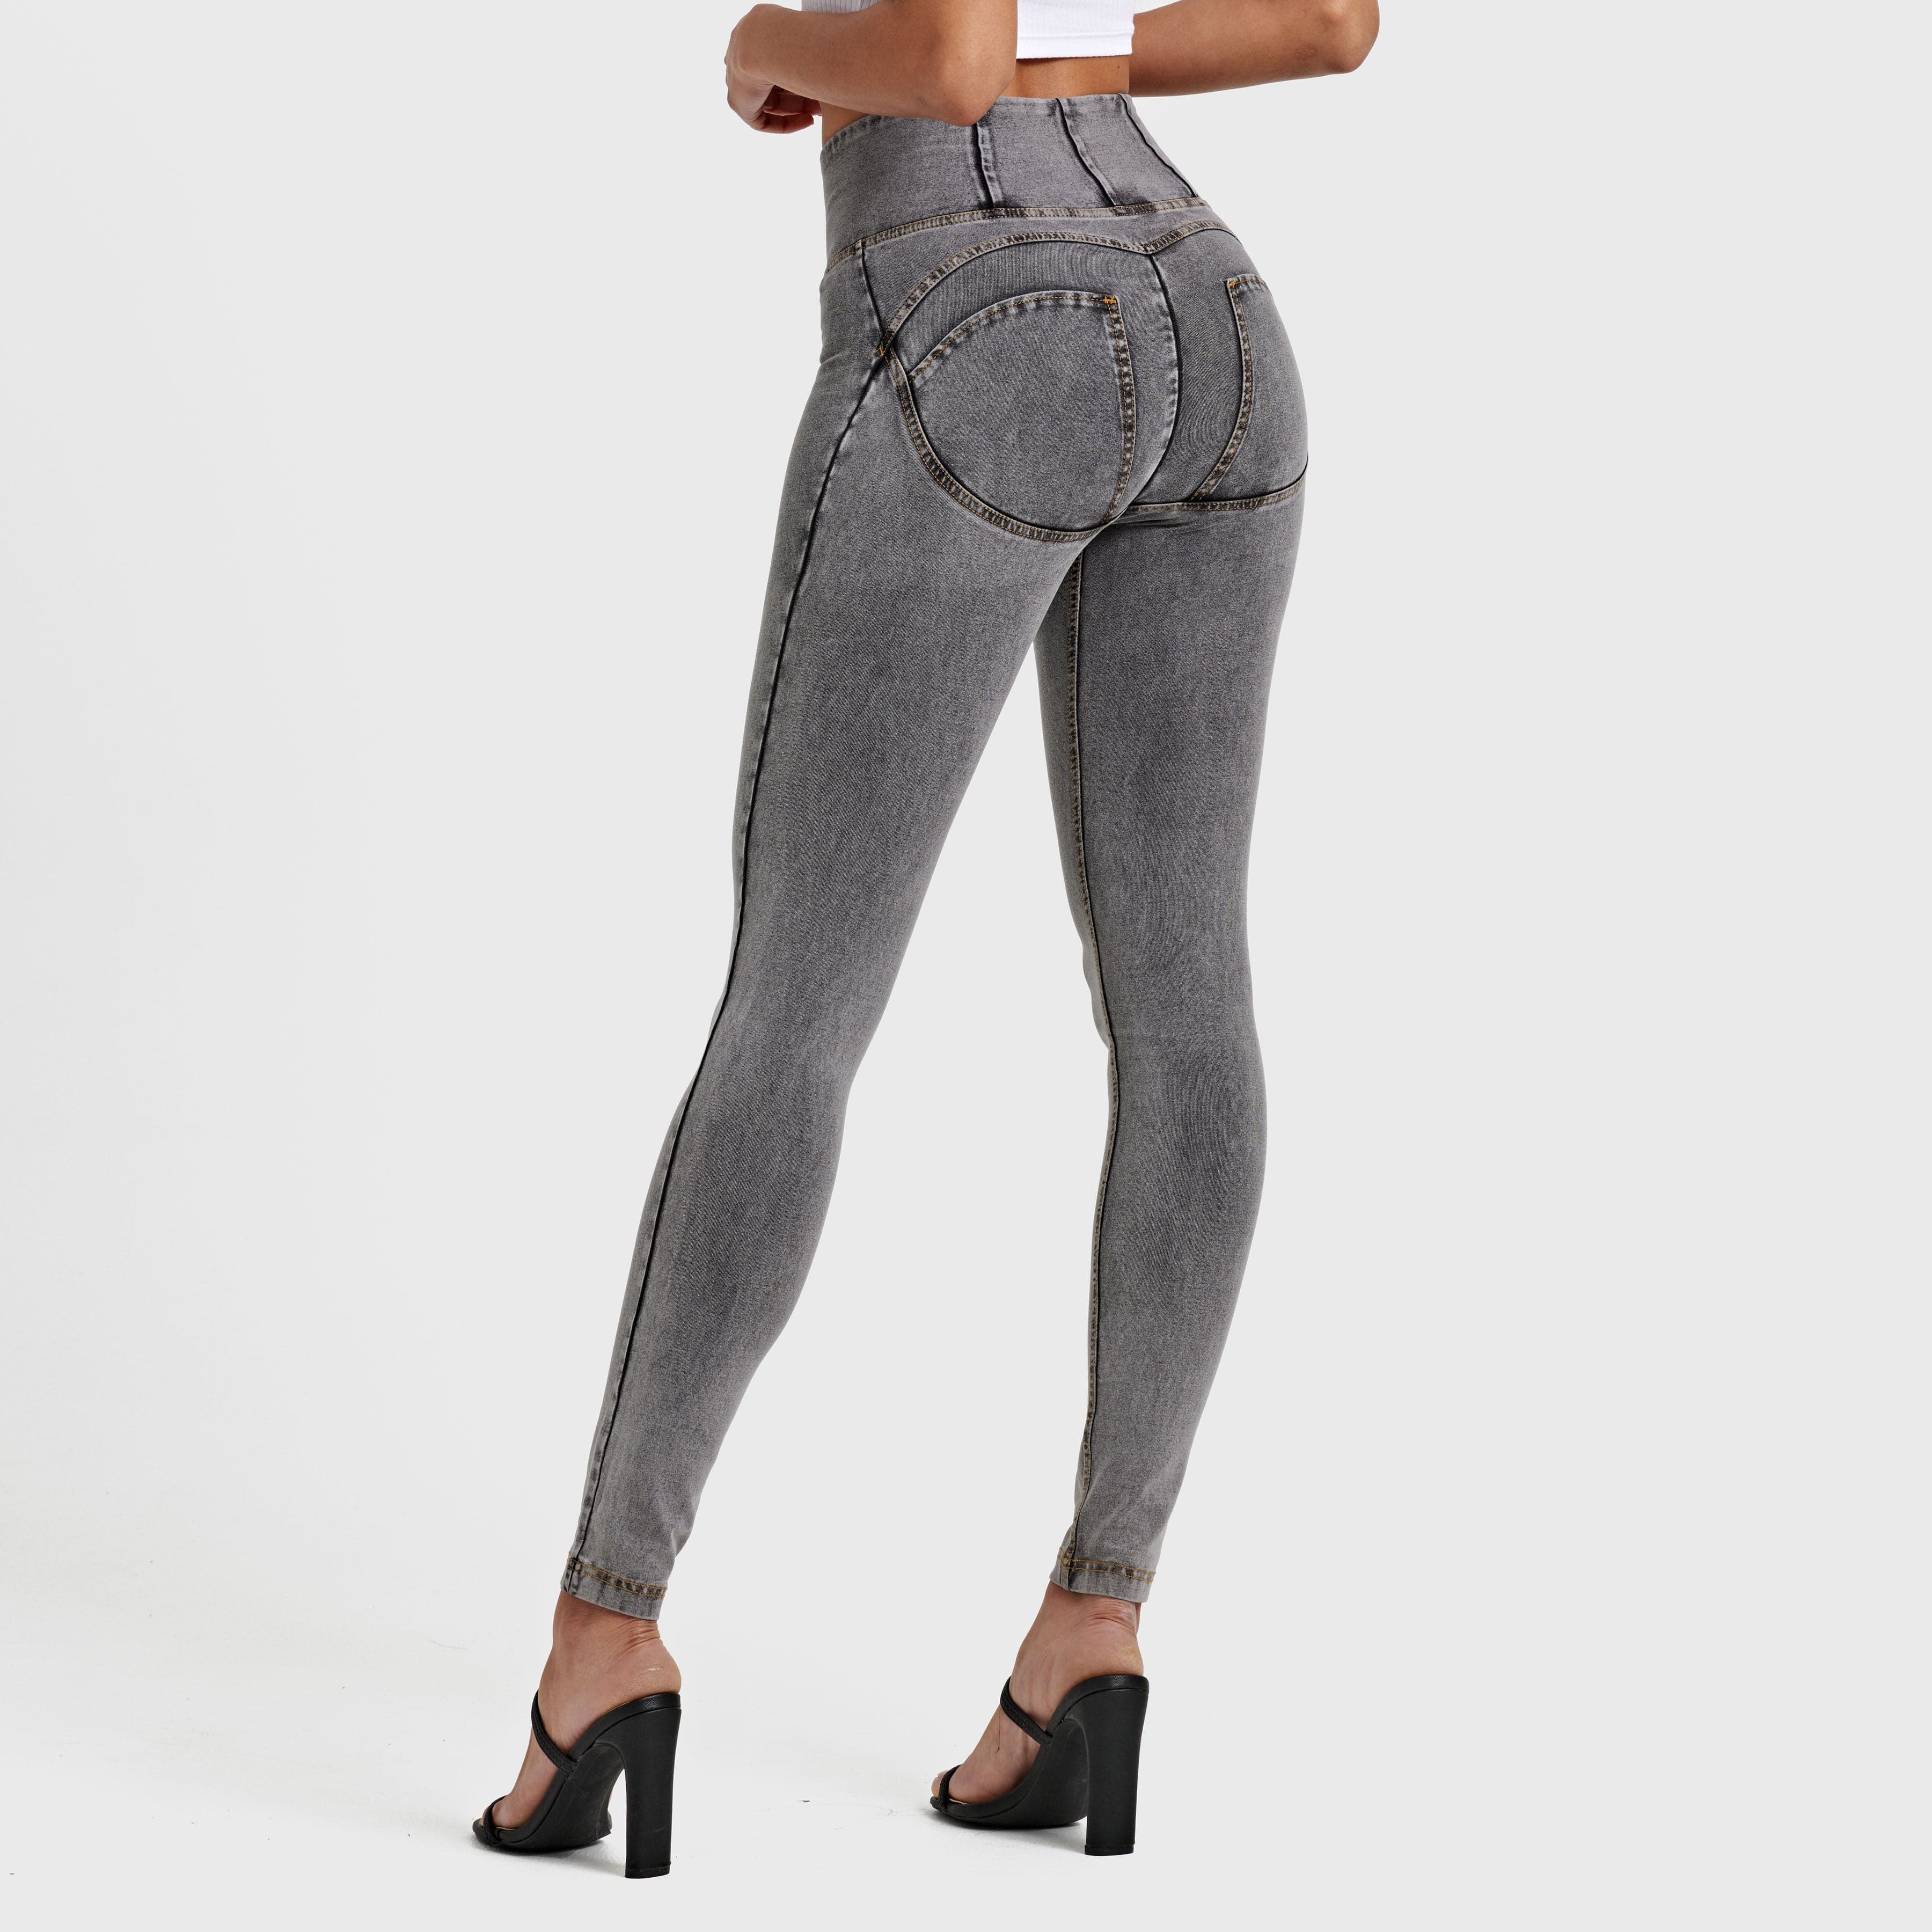 WR.UP® Denim - High Waisted - Full Length - Grey + Yellow Stitching 3